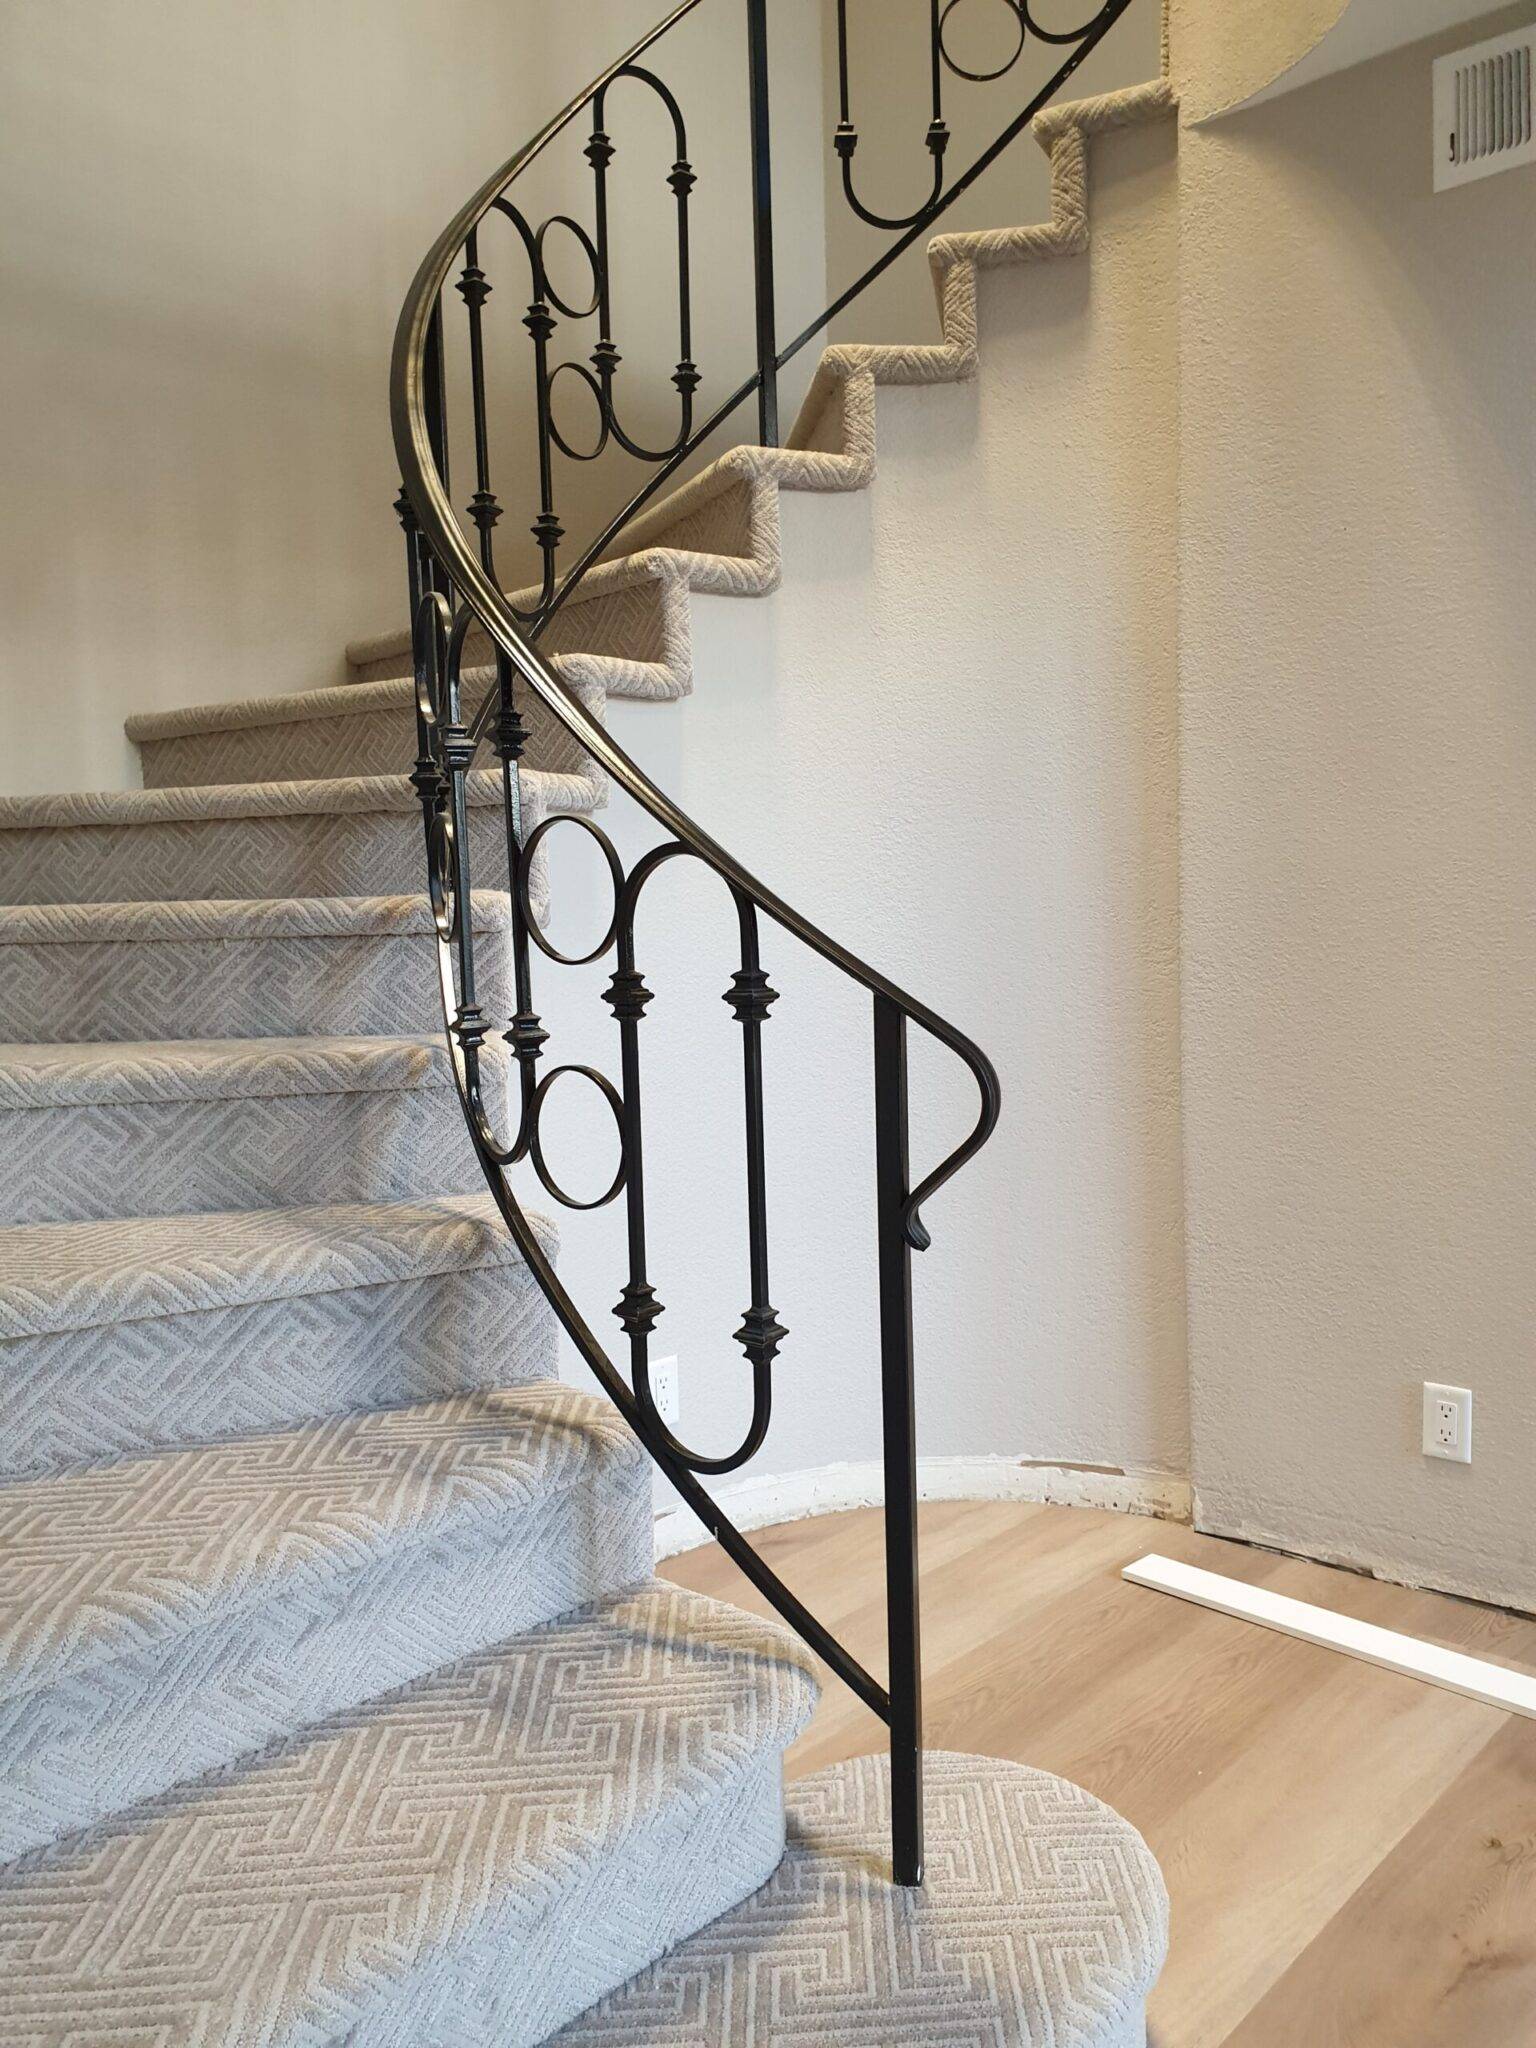 Carpet Flooring on Spiral Stairs in Mountain View